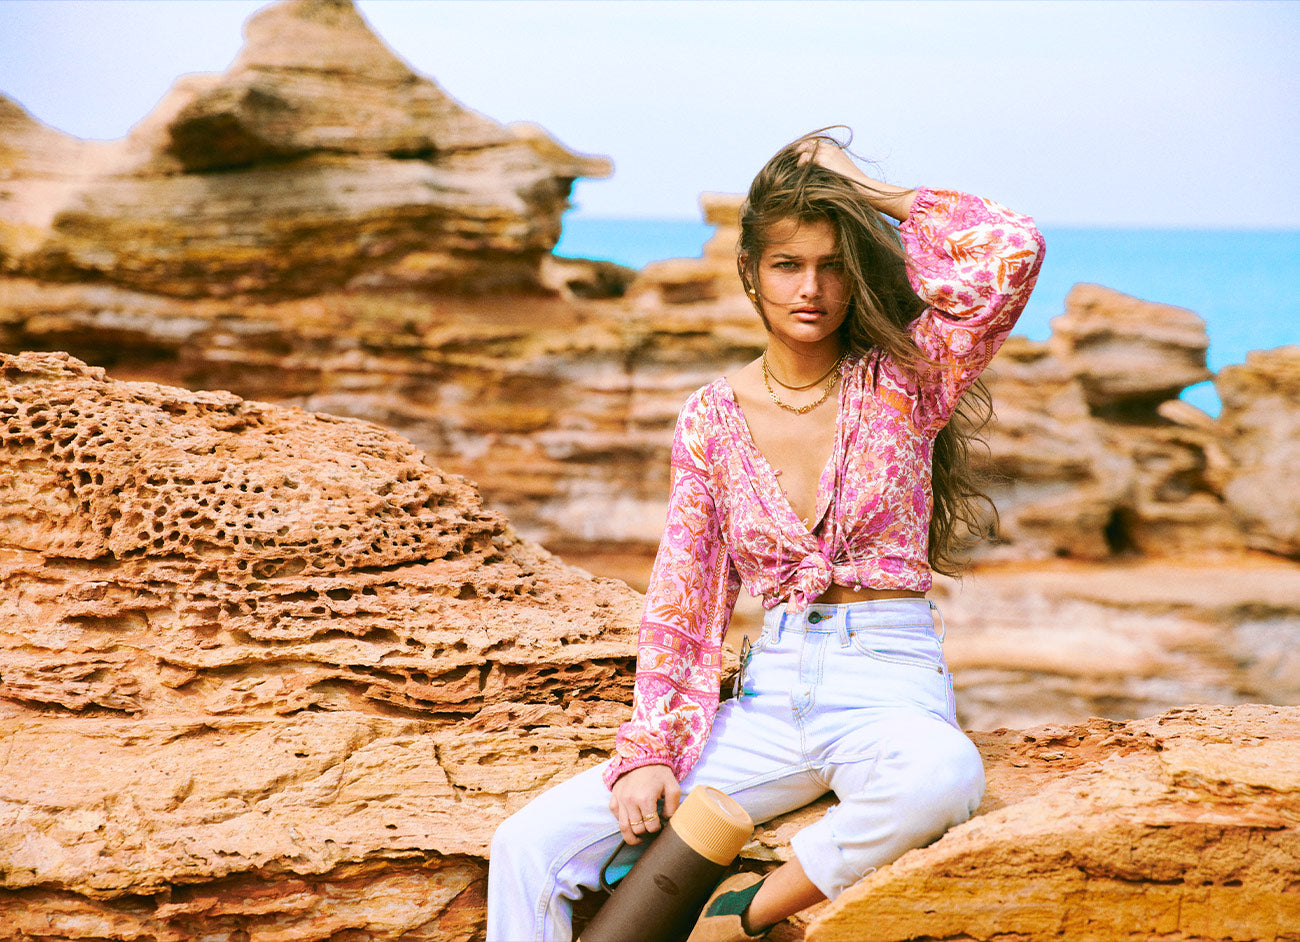 Forget Me Not the new sustainable fashion campaign shot for Arnhem at Cape Leveque, WA